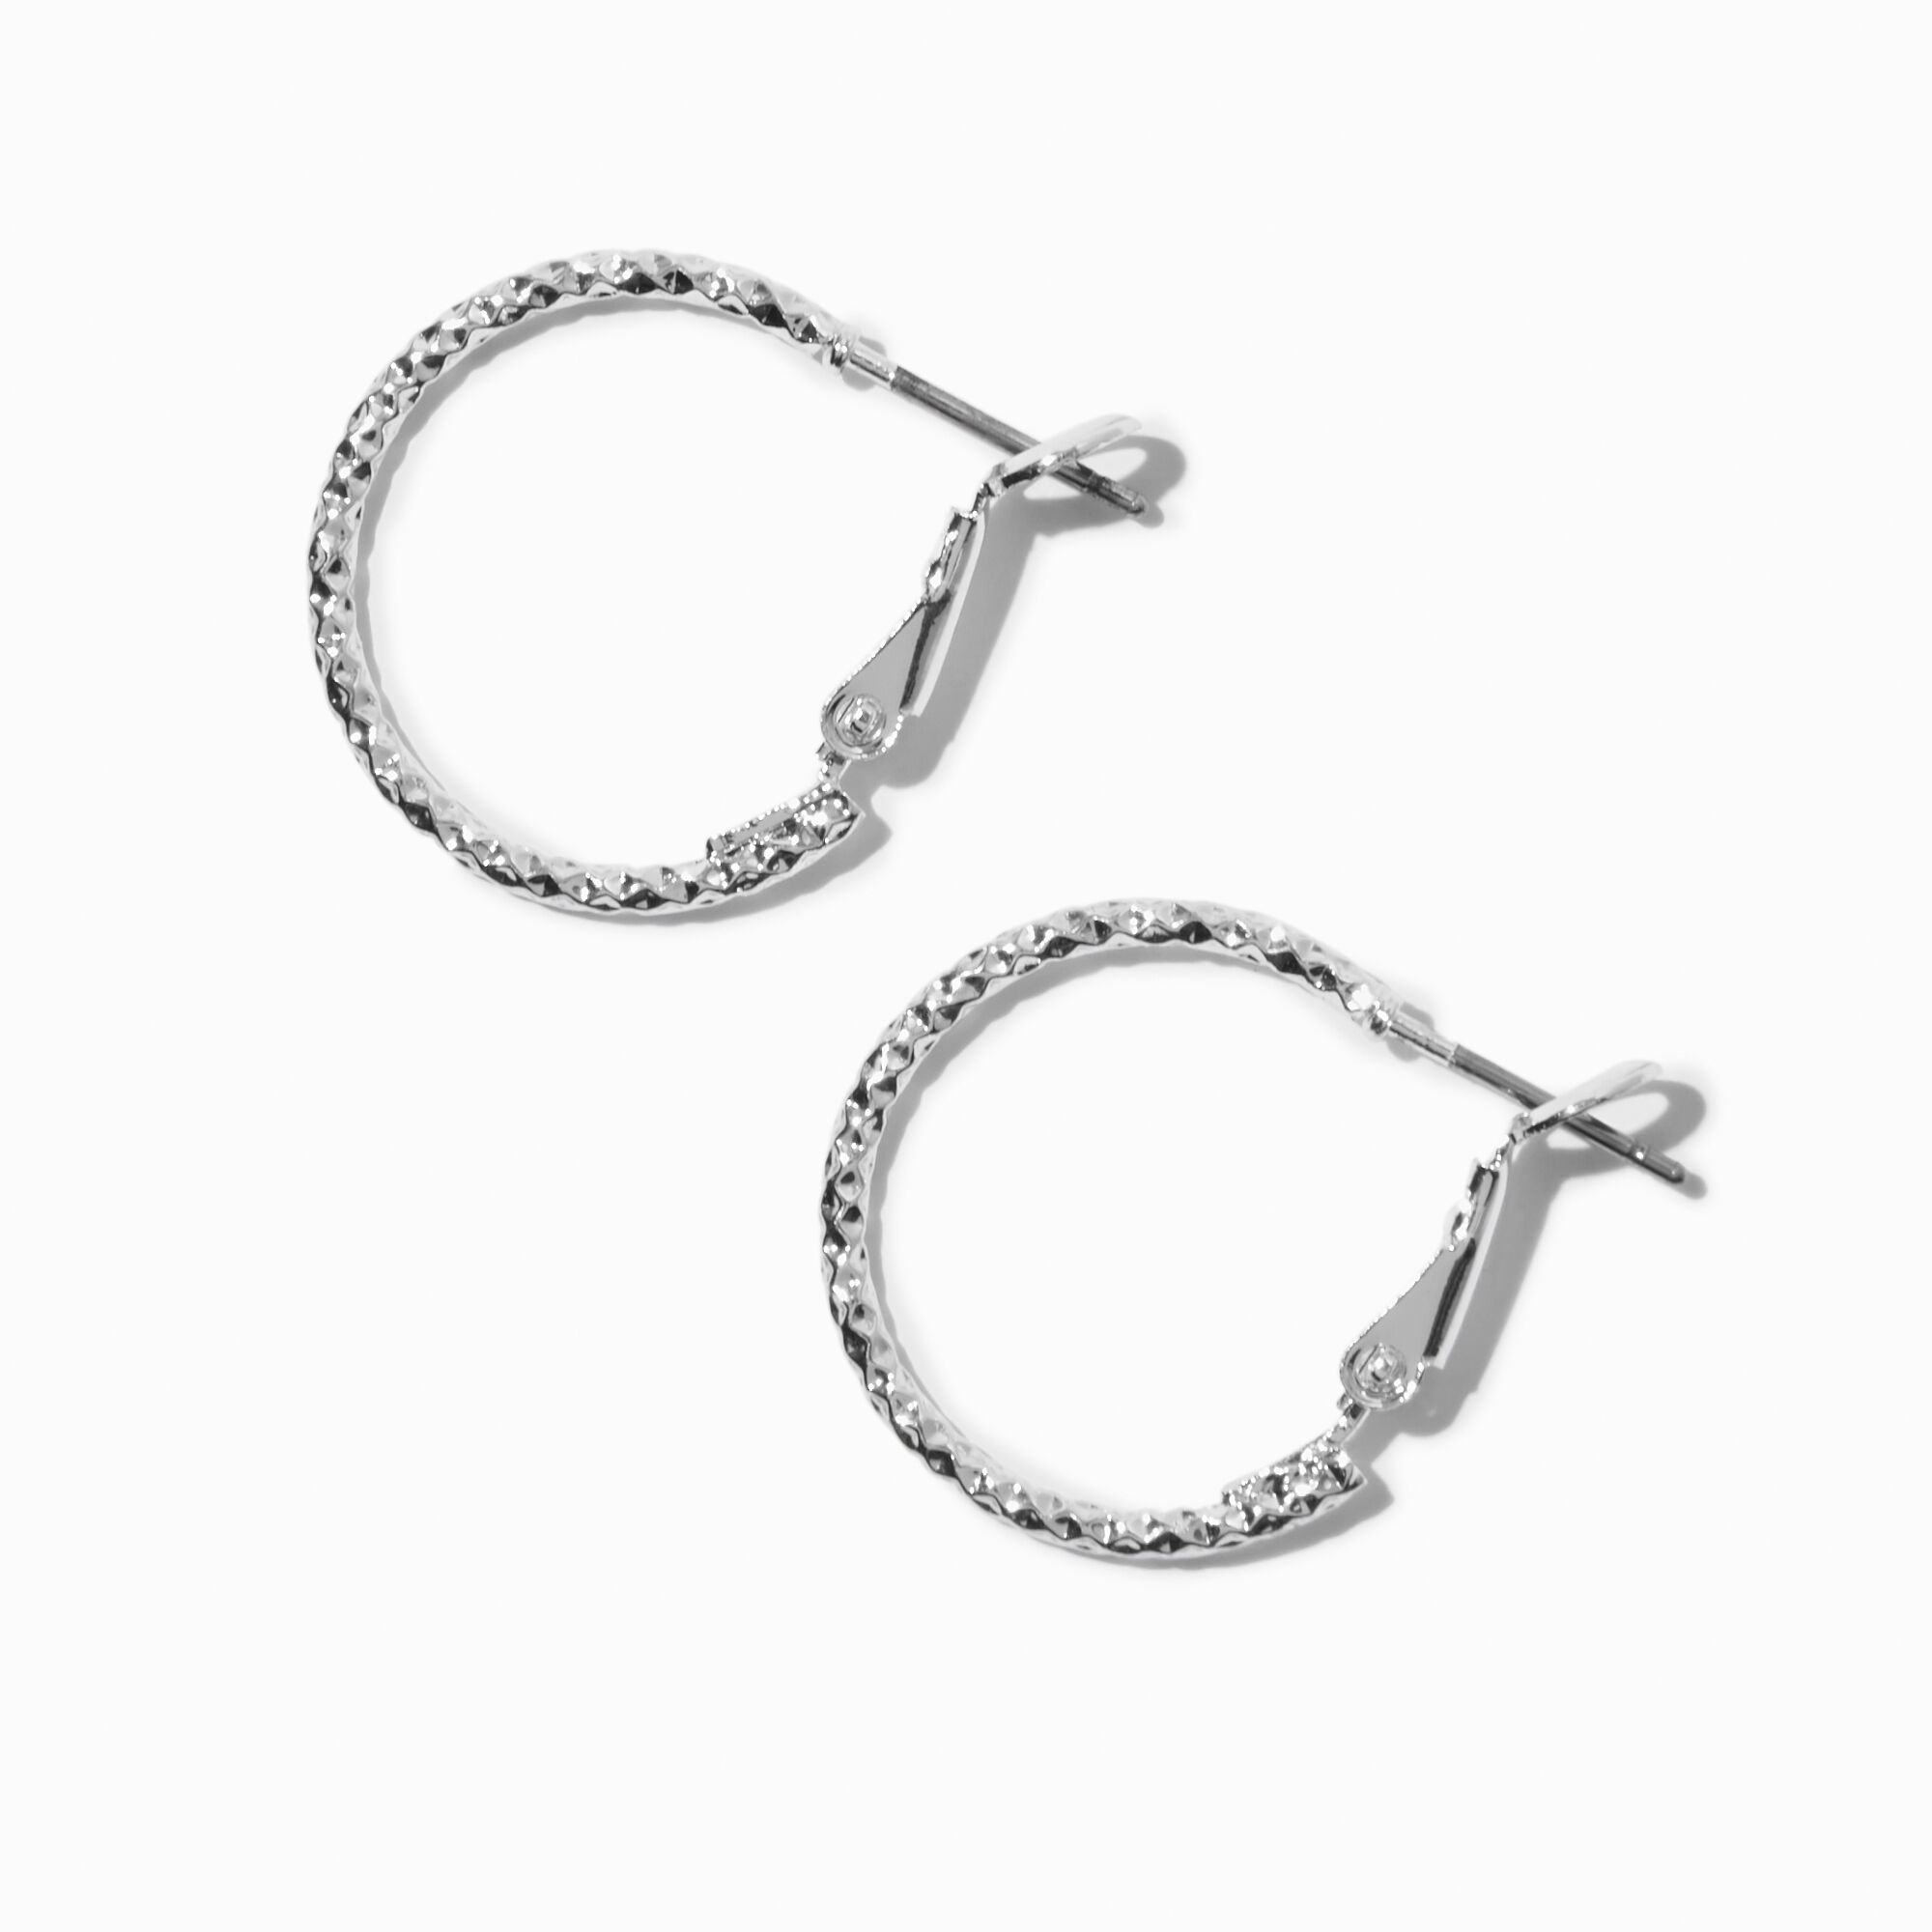 View Claires Tone Laser Cut 20MM Hoop Earrings Silver information